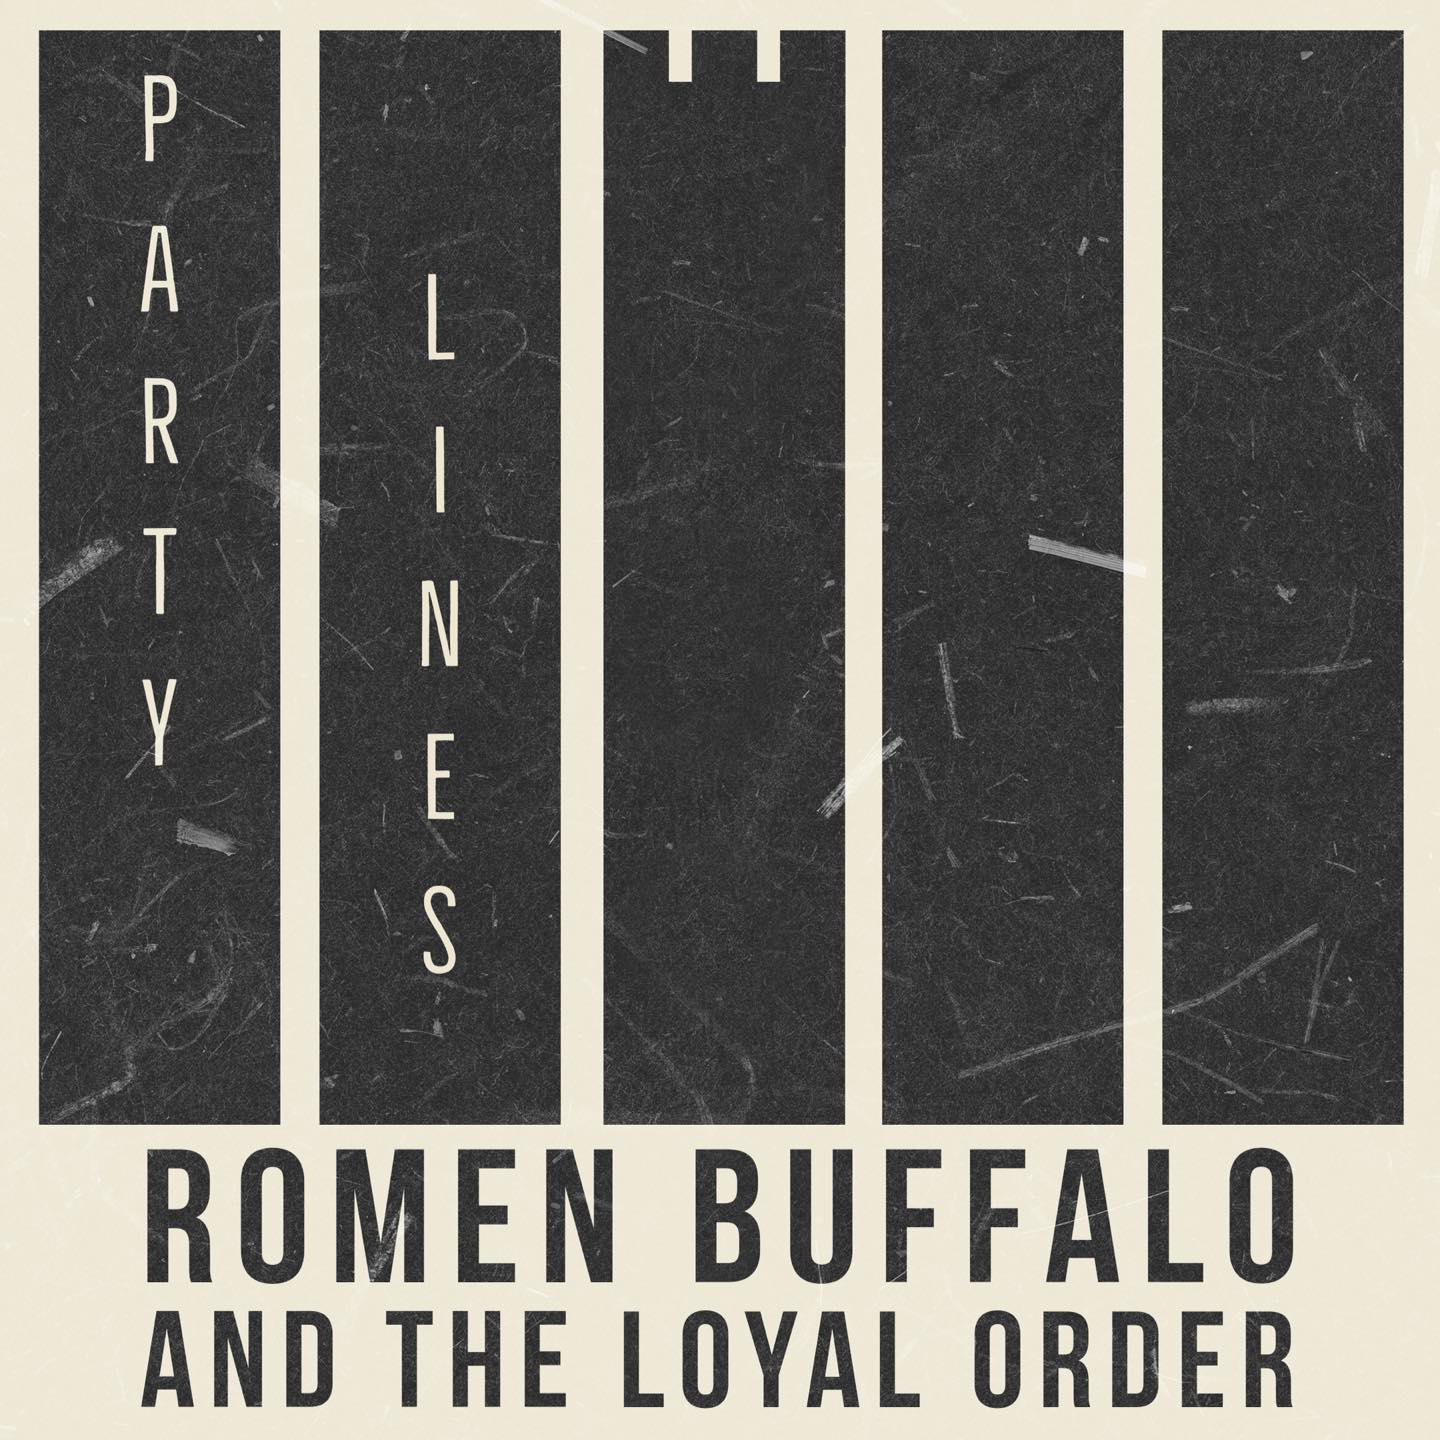 "Party Lines" from Romen Buffalo and The Loyal Order is out now